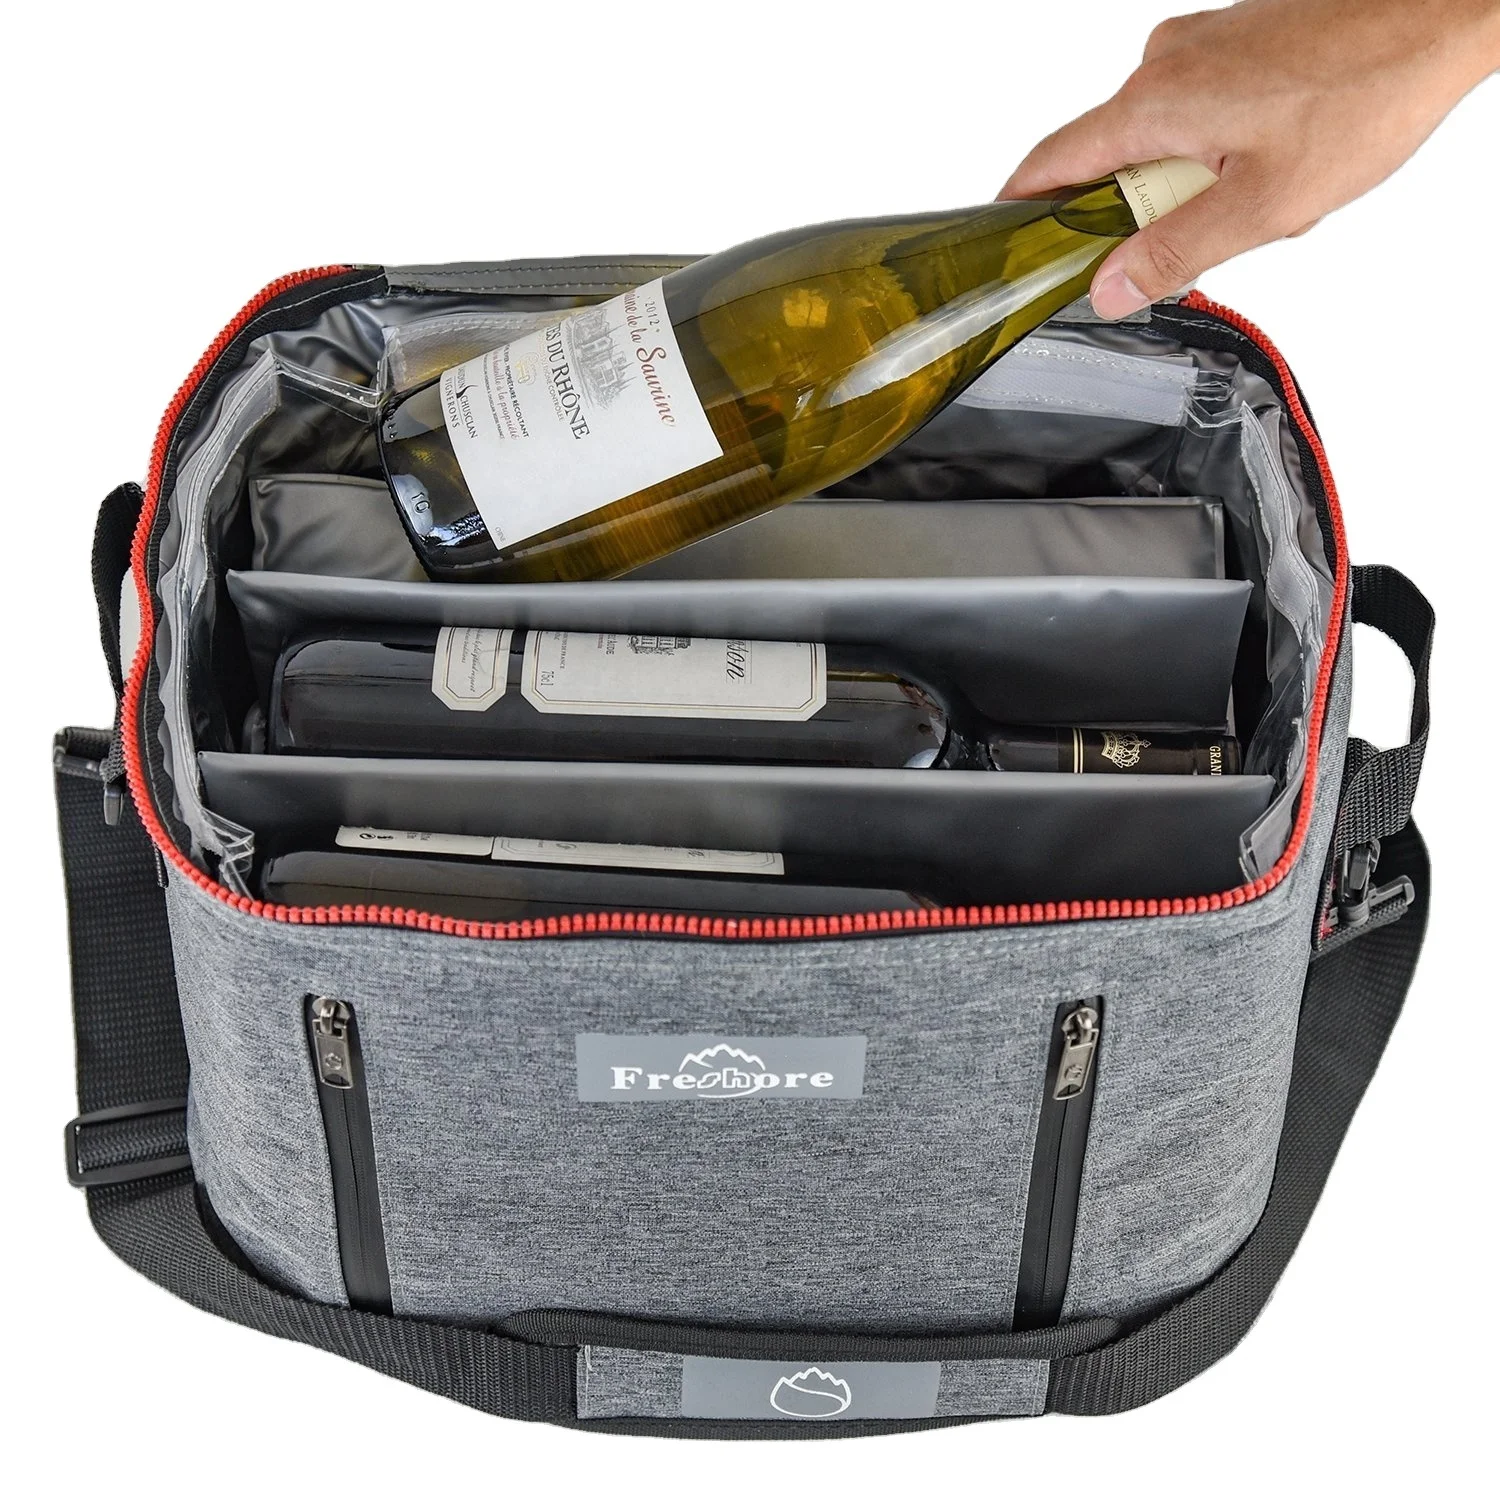 

customized new Insulated lunch thermal non woven food delivery Cooler bag,Promotion Portable Wine Cooler Bag, Customized color